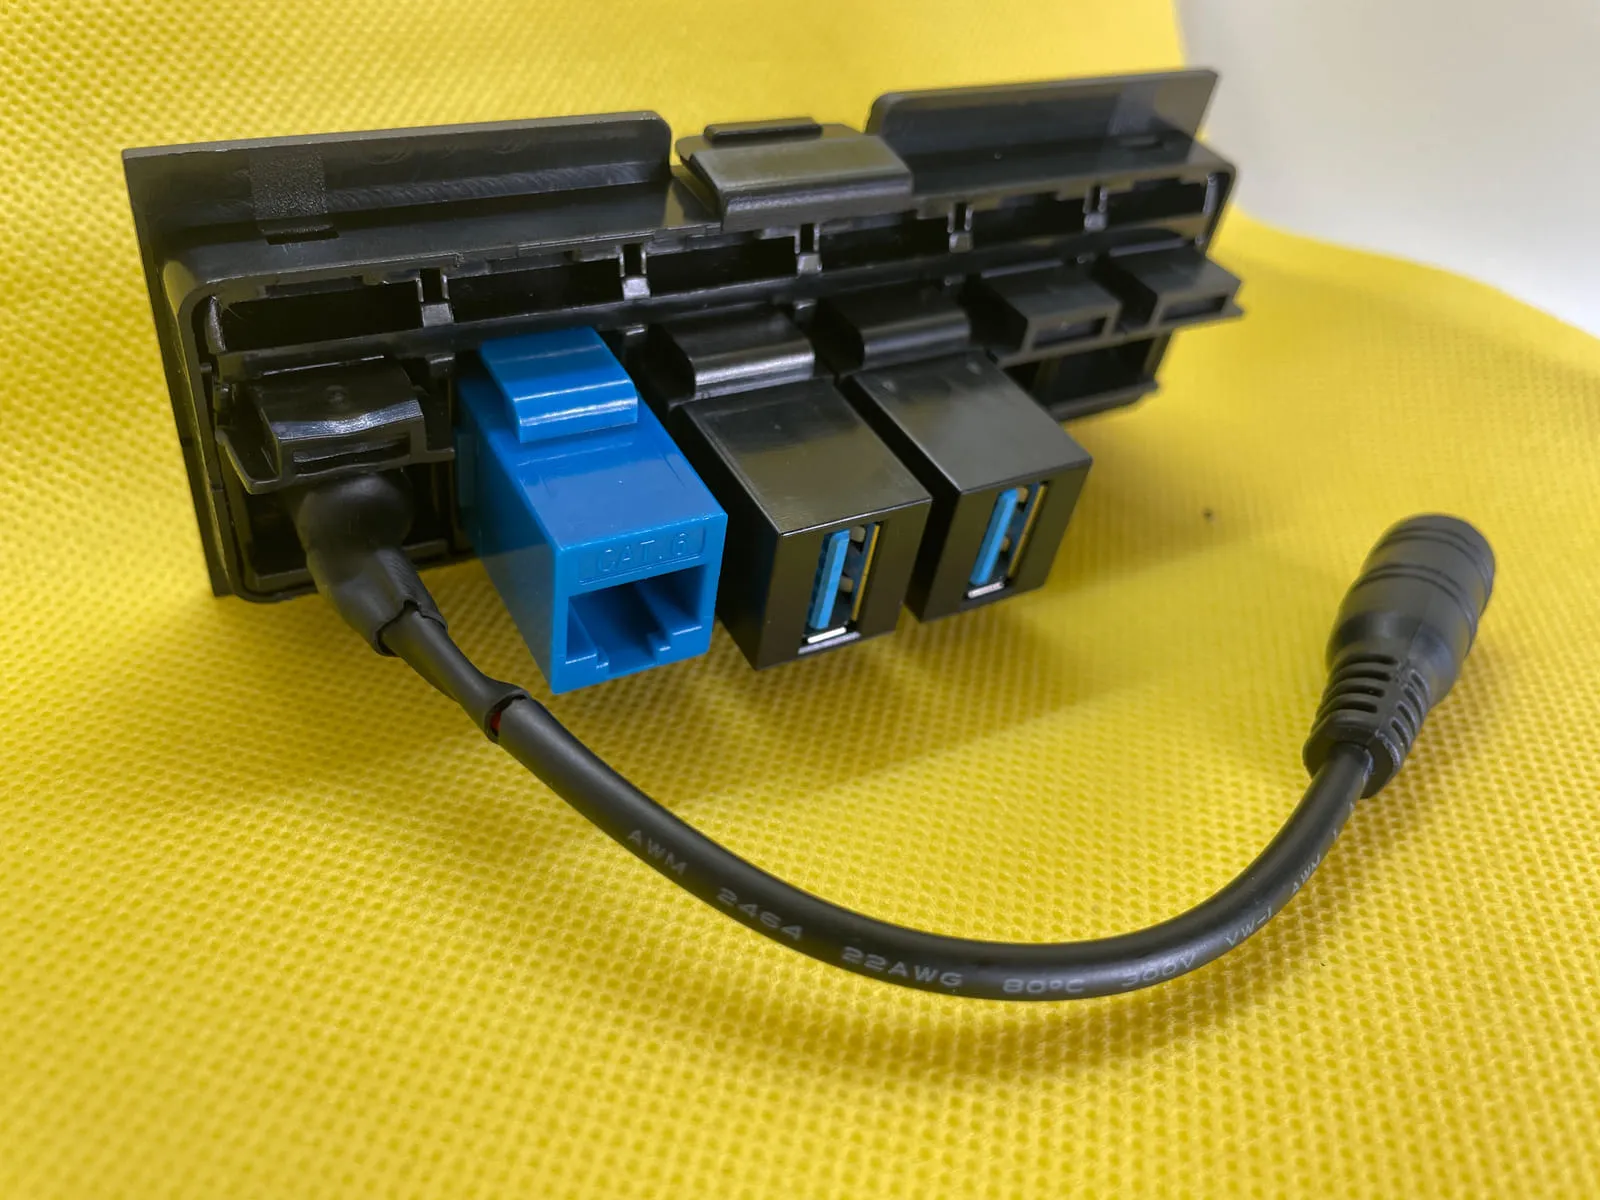 Back view of patch panel with USB, Ethernet, and custom barrel jack keystone inserts